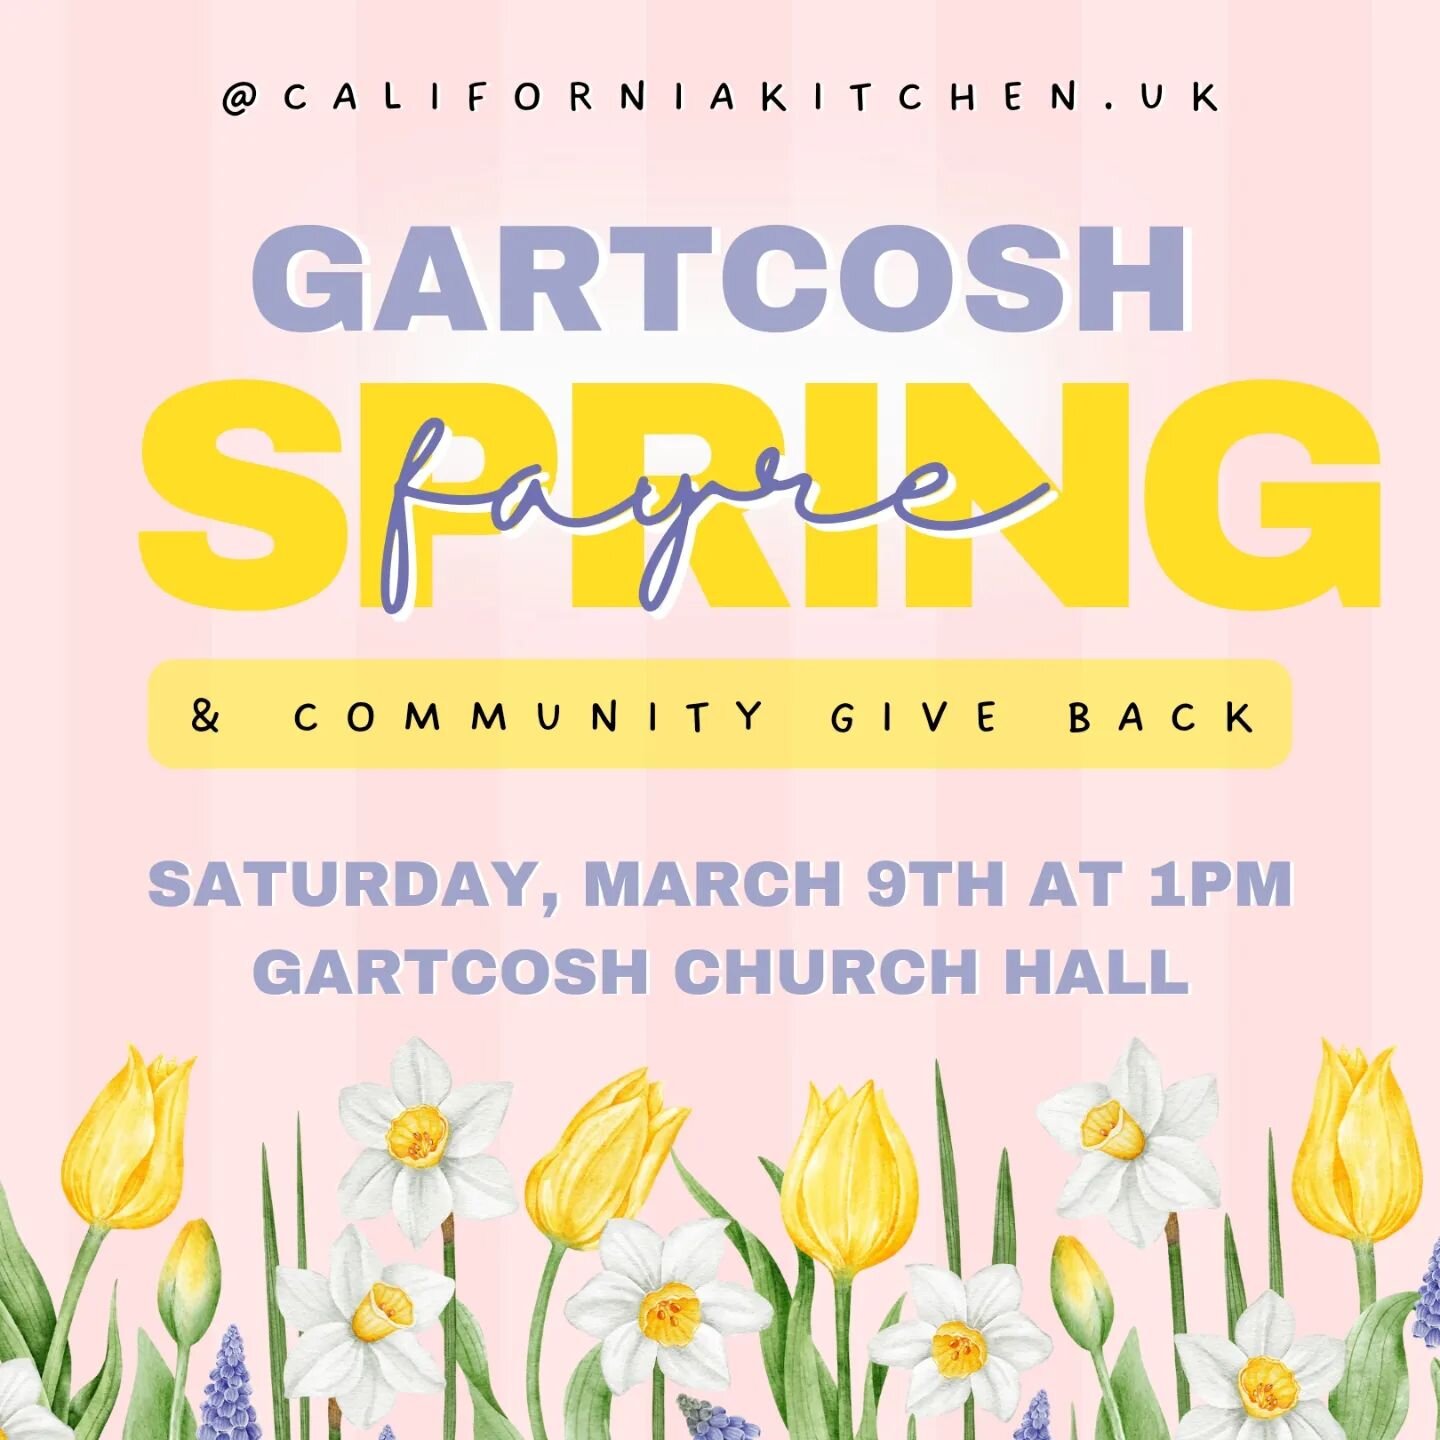 🌟 Keen to get your hands on some of our bread? Well next weekend is your chance at the Gartcosh Easter Fayre! We'll be there with our award-winning sourdough and your favourite Californian dips. Even better, we're giving back to the Gartcosh communi